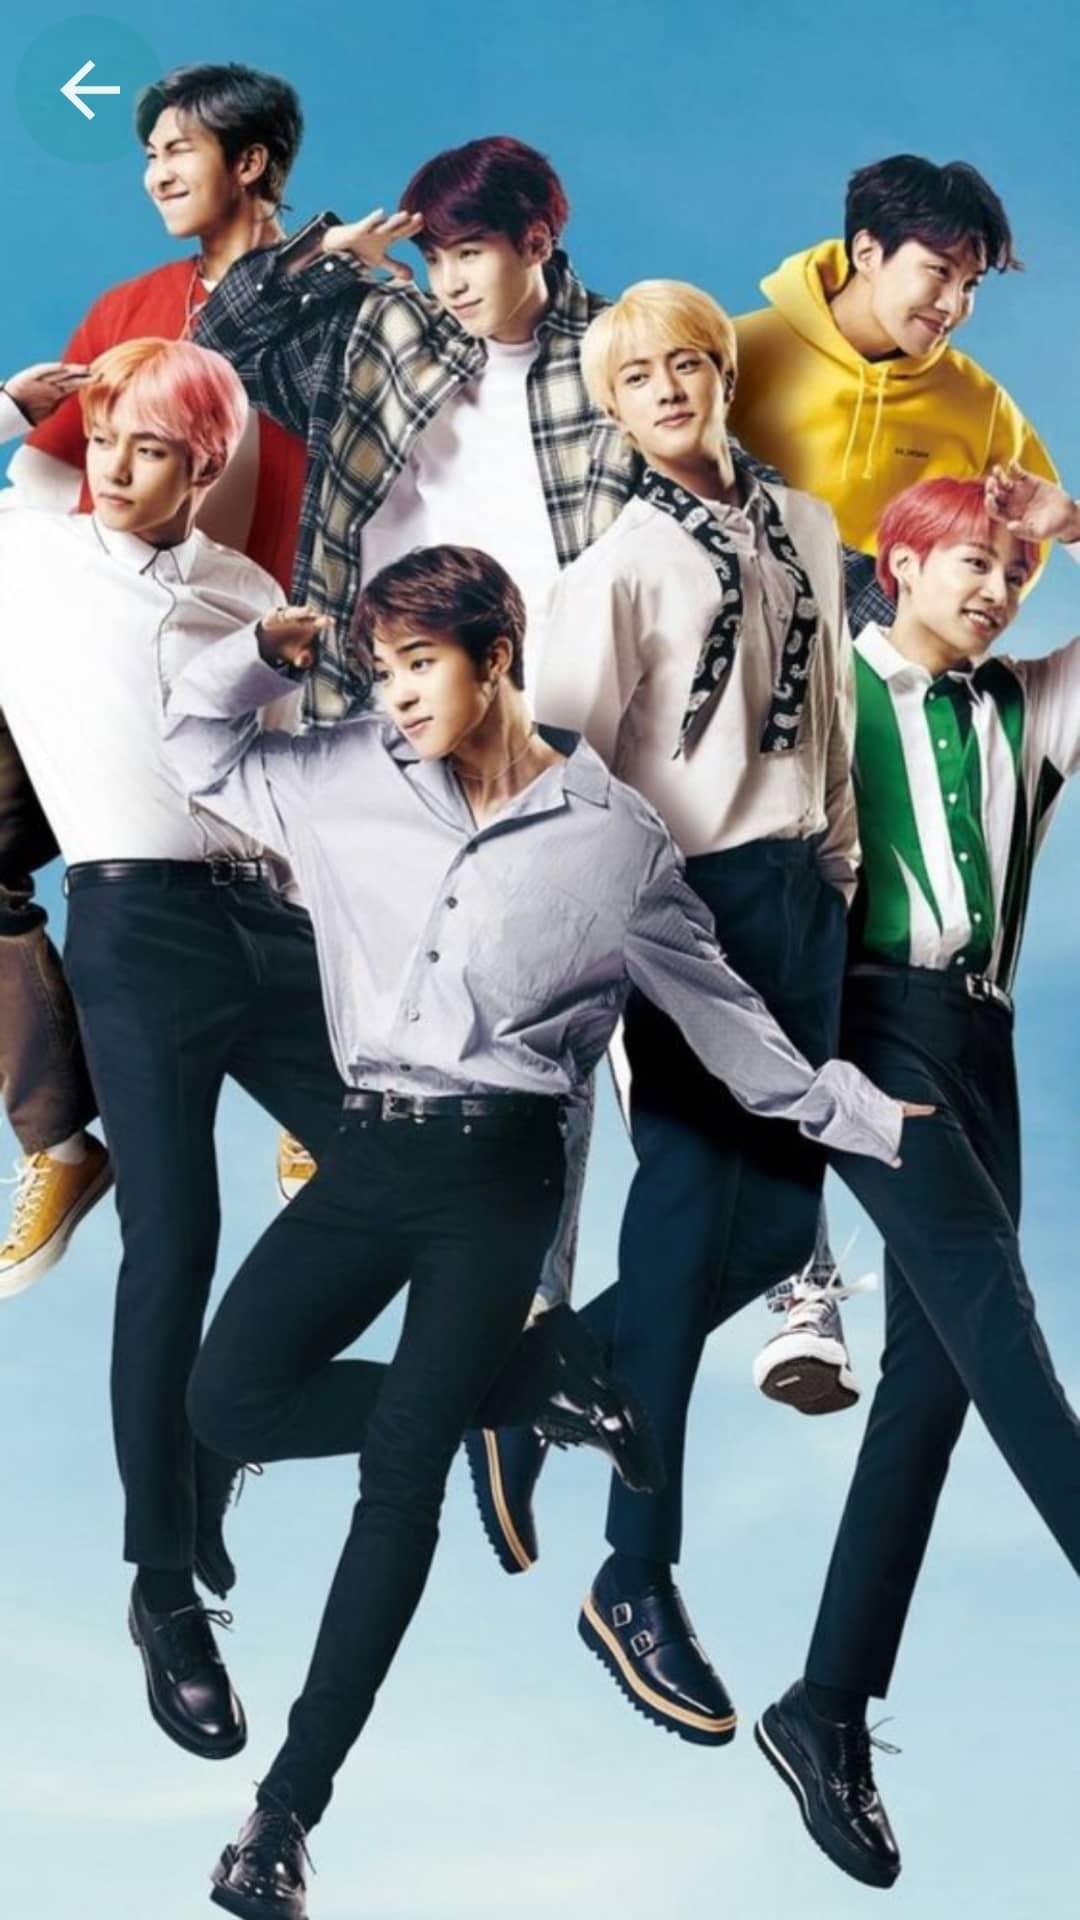 New BTS Wallpapers - Kpop Wallpaper HD 2019 for Android - APK Download